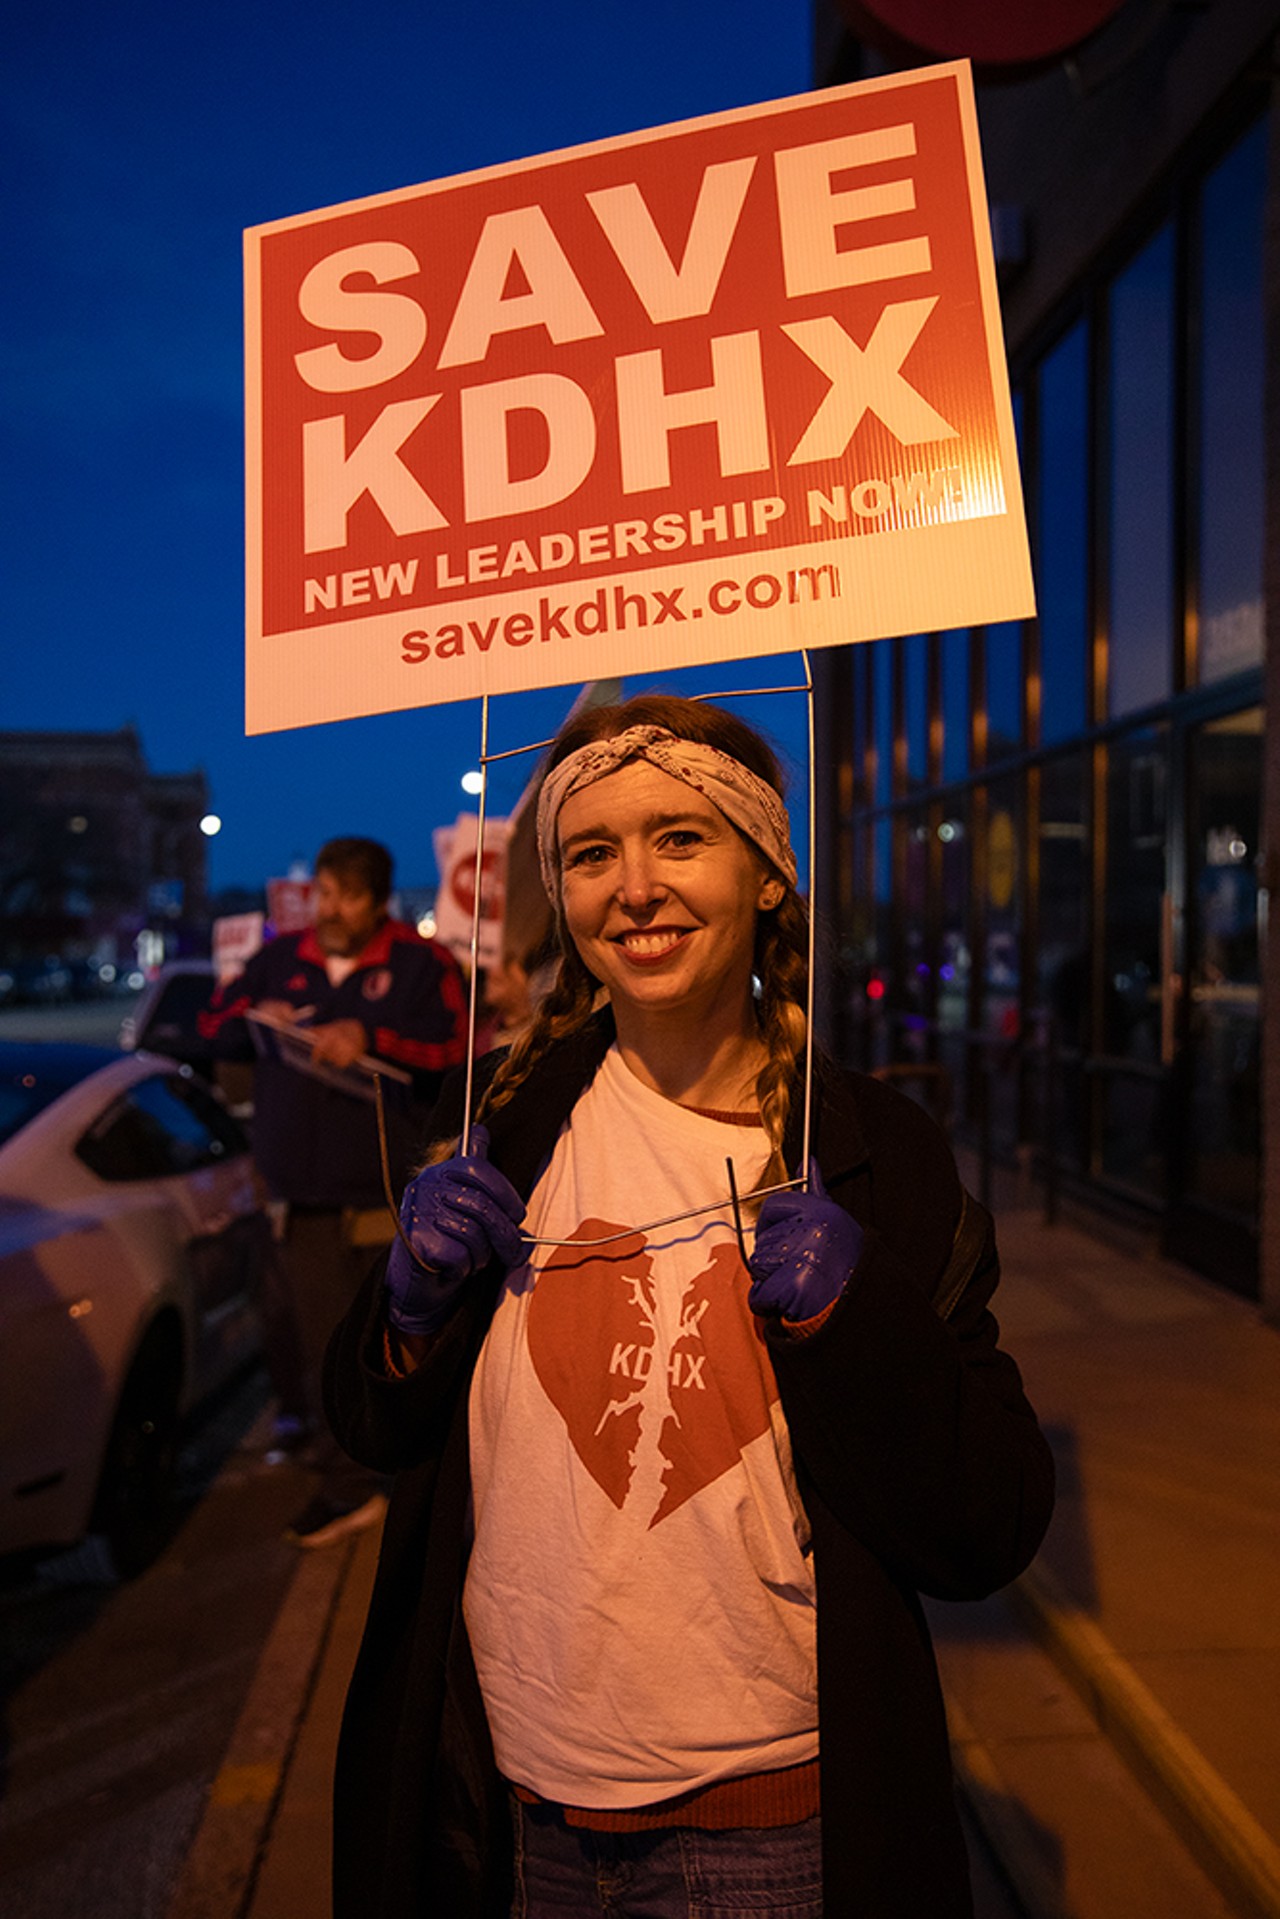 Protest Rally Targets KDHX Leadership at Its Doorstep